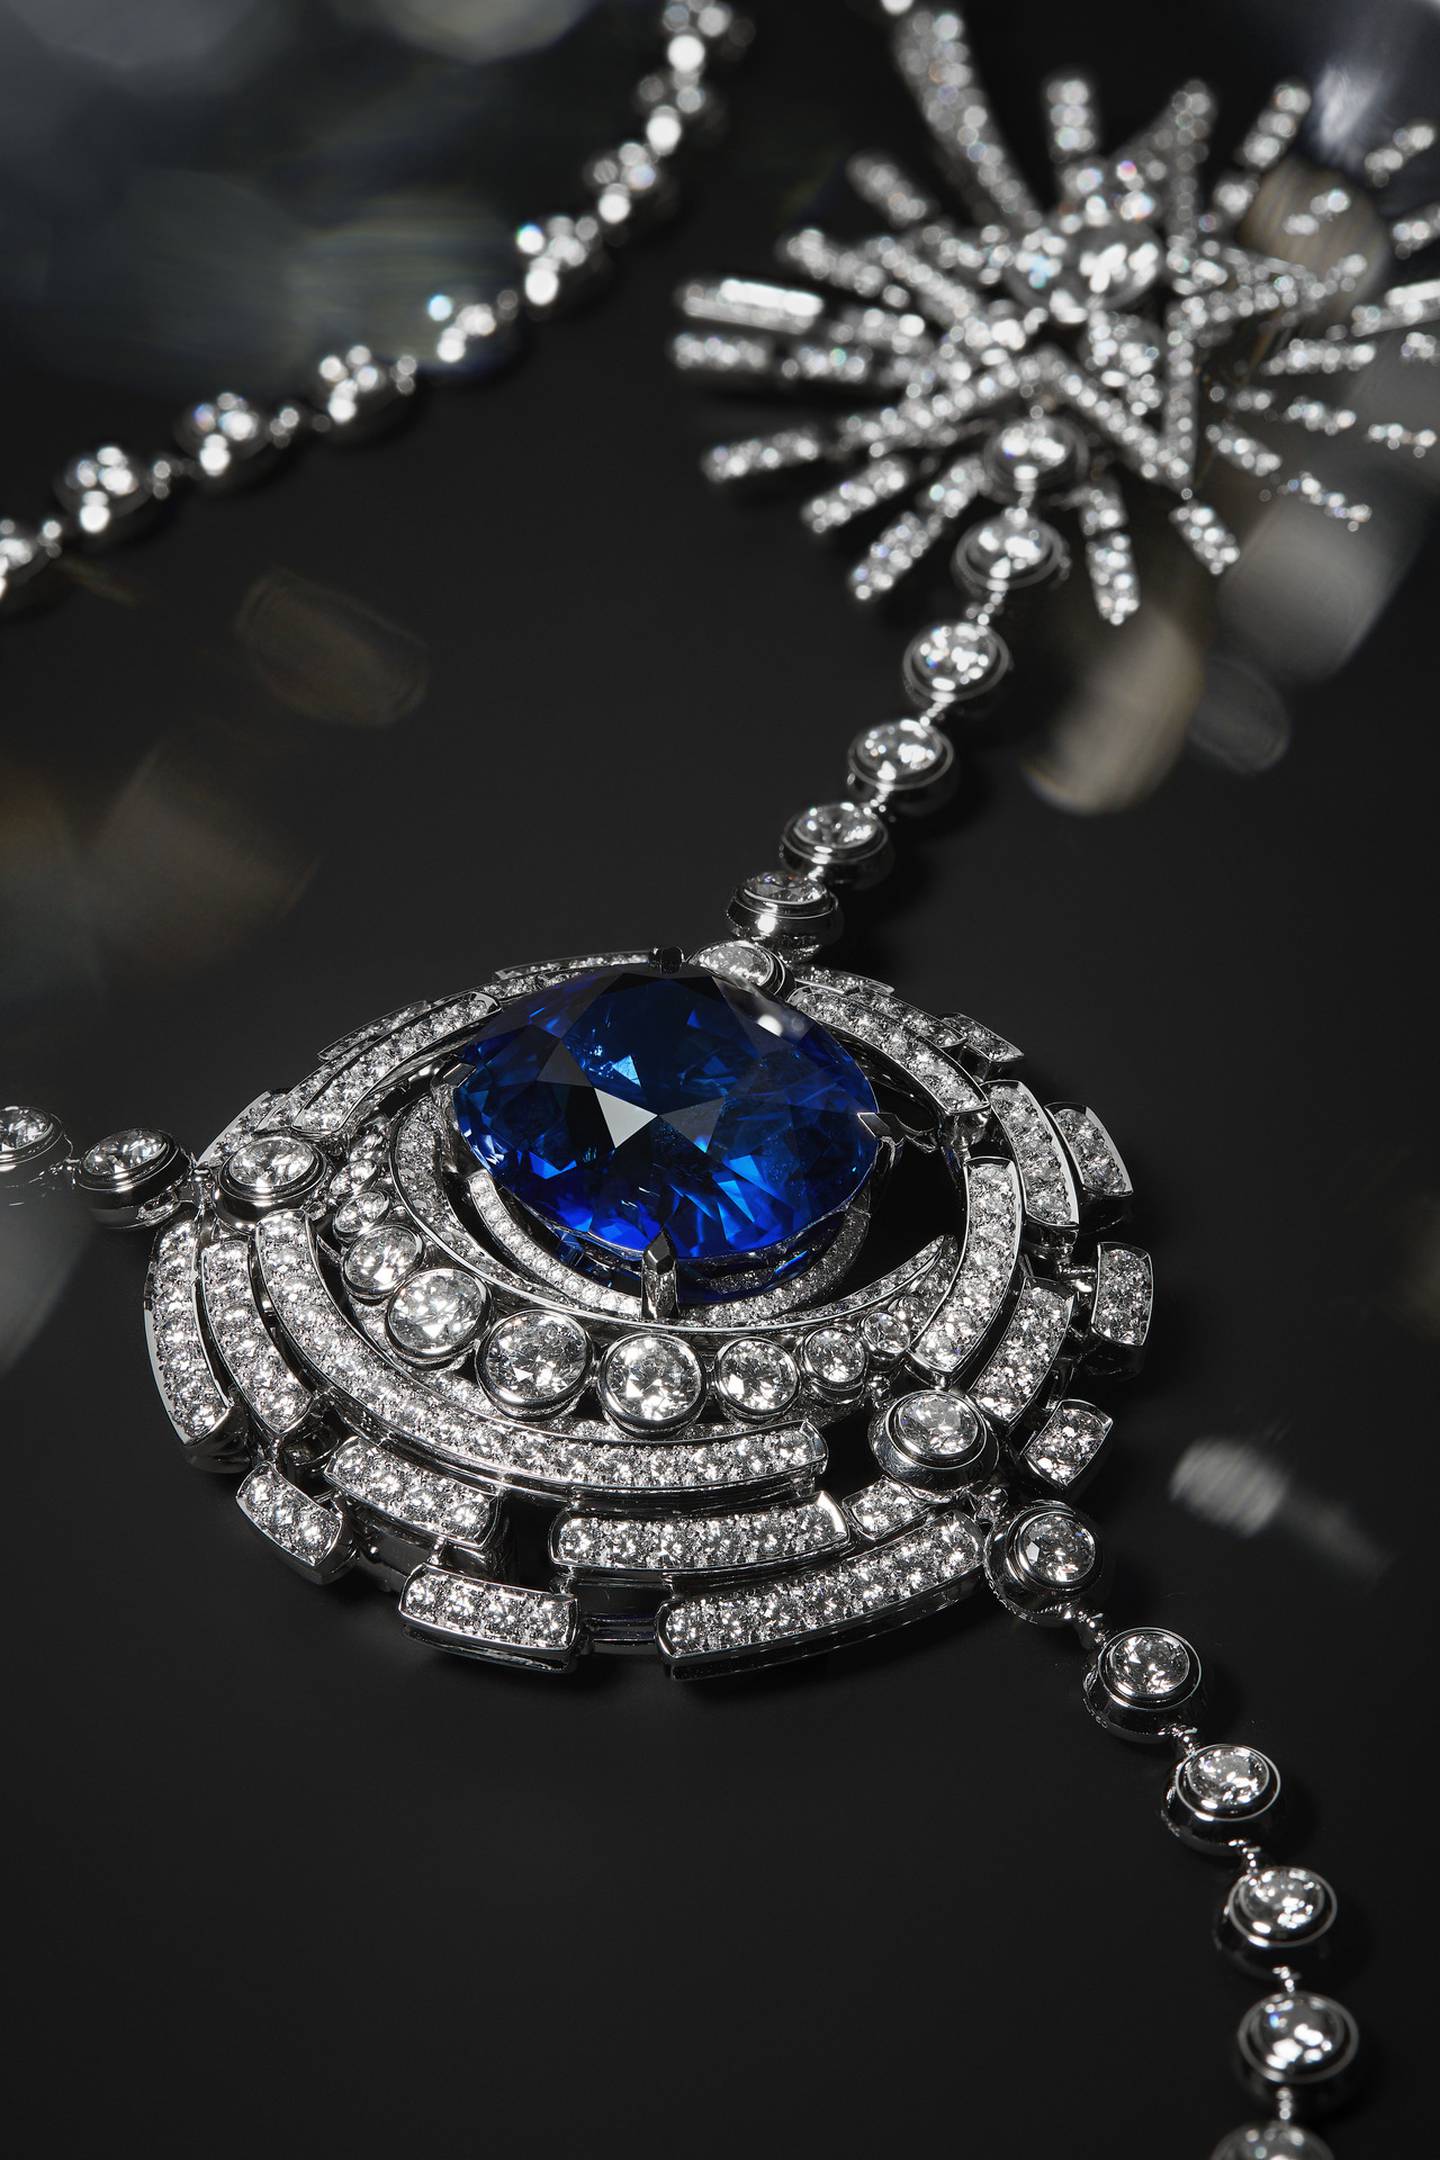 An oval 55.55-carat sapphire sits at the heart of the Allure Celeste necklace. Photo: Chanel